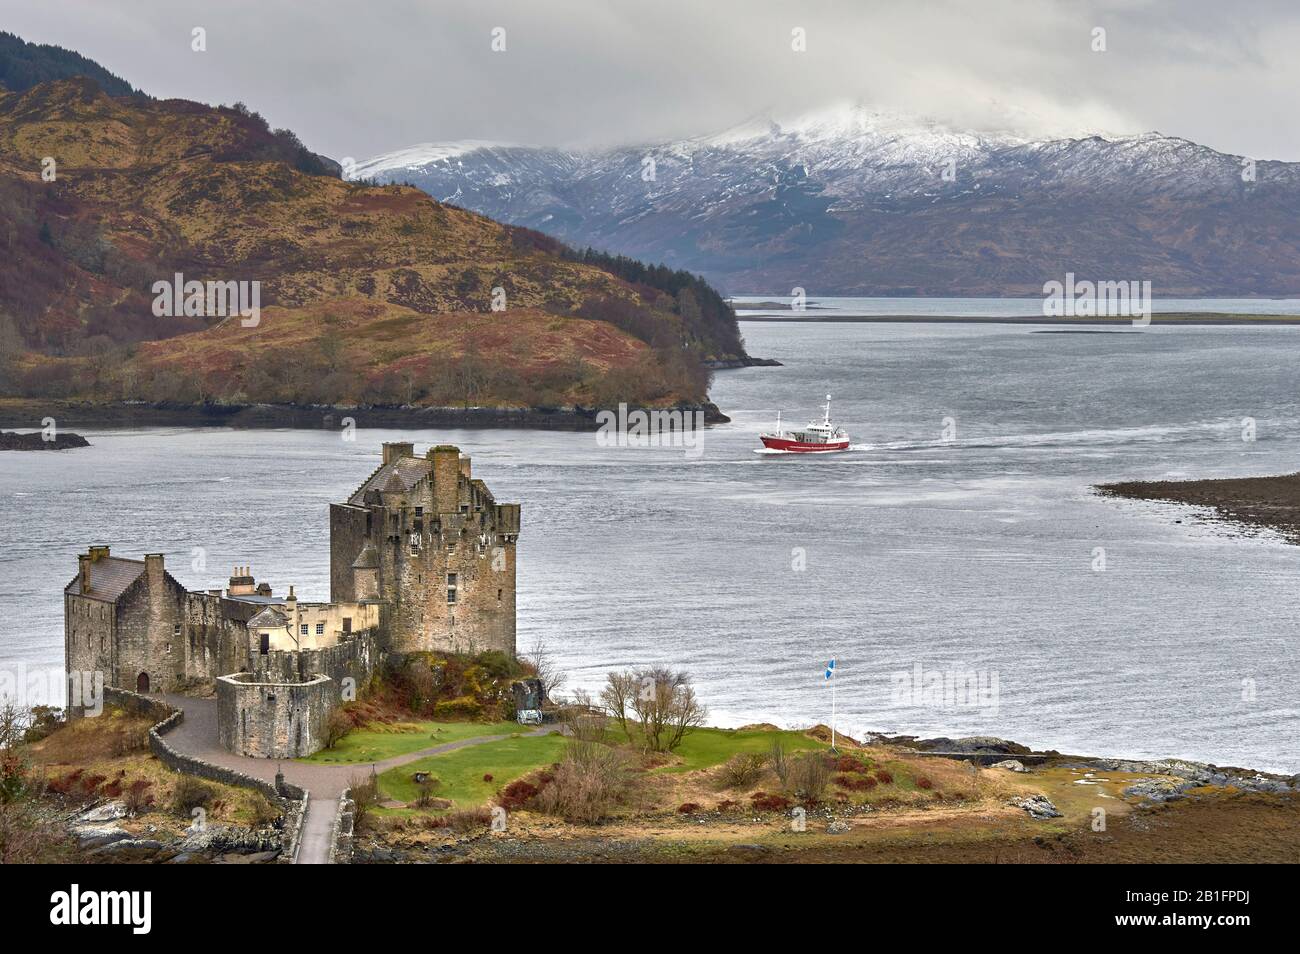 EILEAN DONAN CASTLE LOCH DUICH DORNIE SCOTLAND WINTER THE CASTLE OVERLOOKING THE WATERS OF THE LOCH WITH RED BOAT Stock Photo